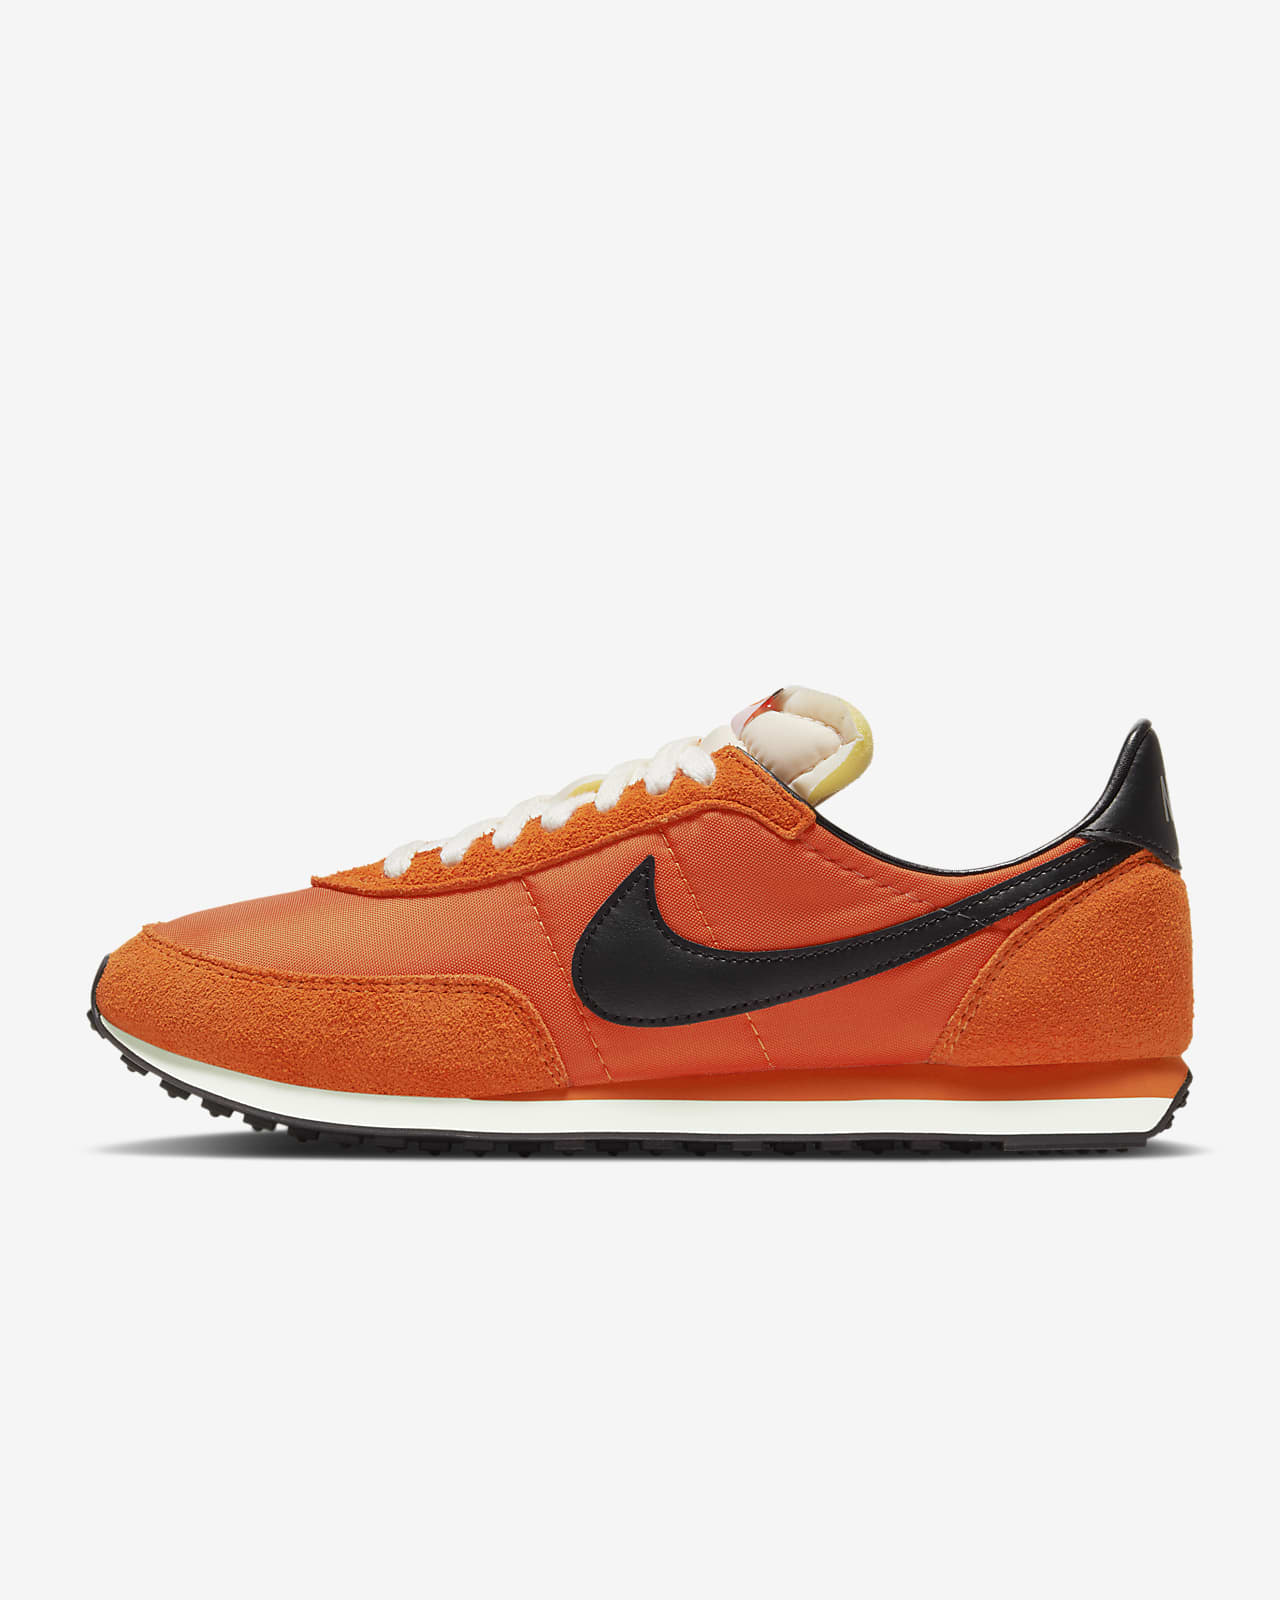 Nike Waffle Trainer 2 SP Men's Shoes 